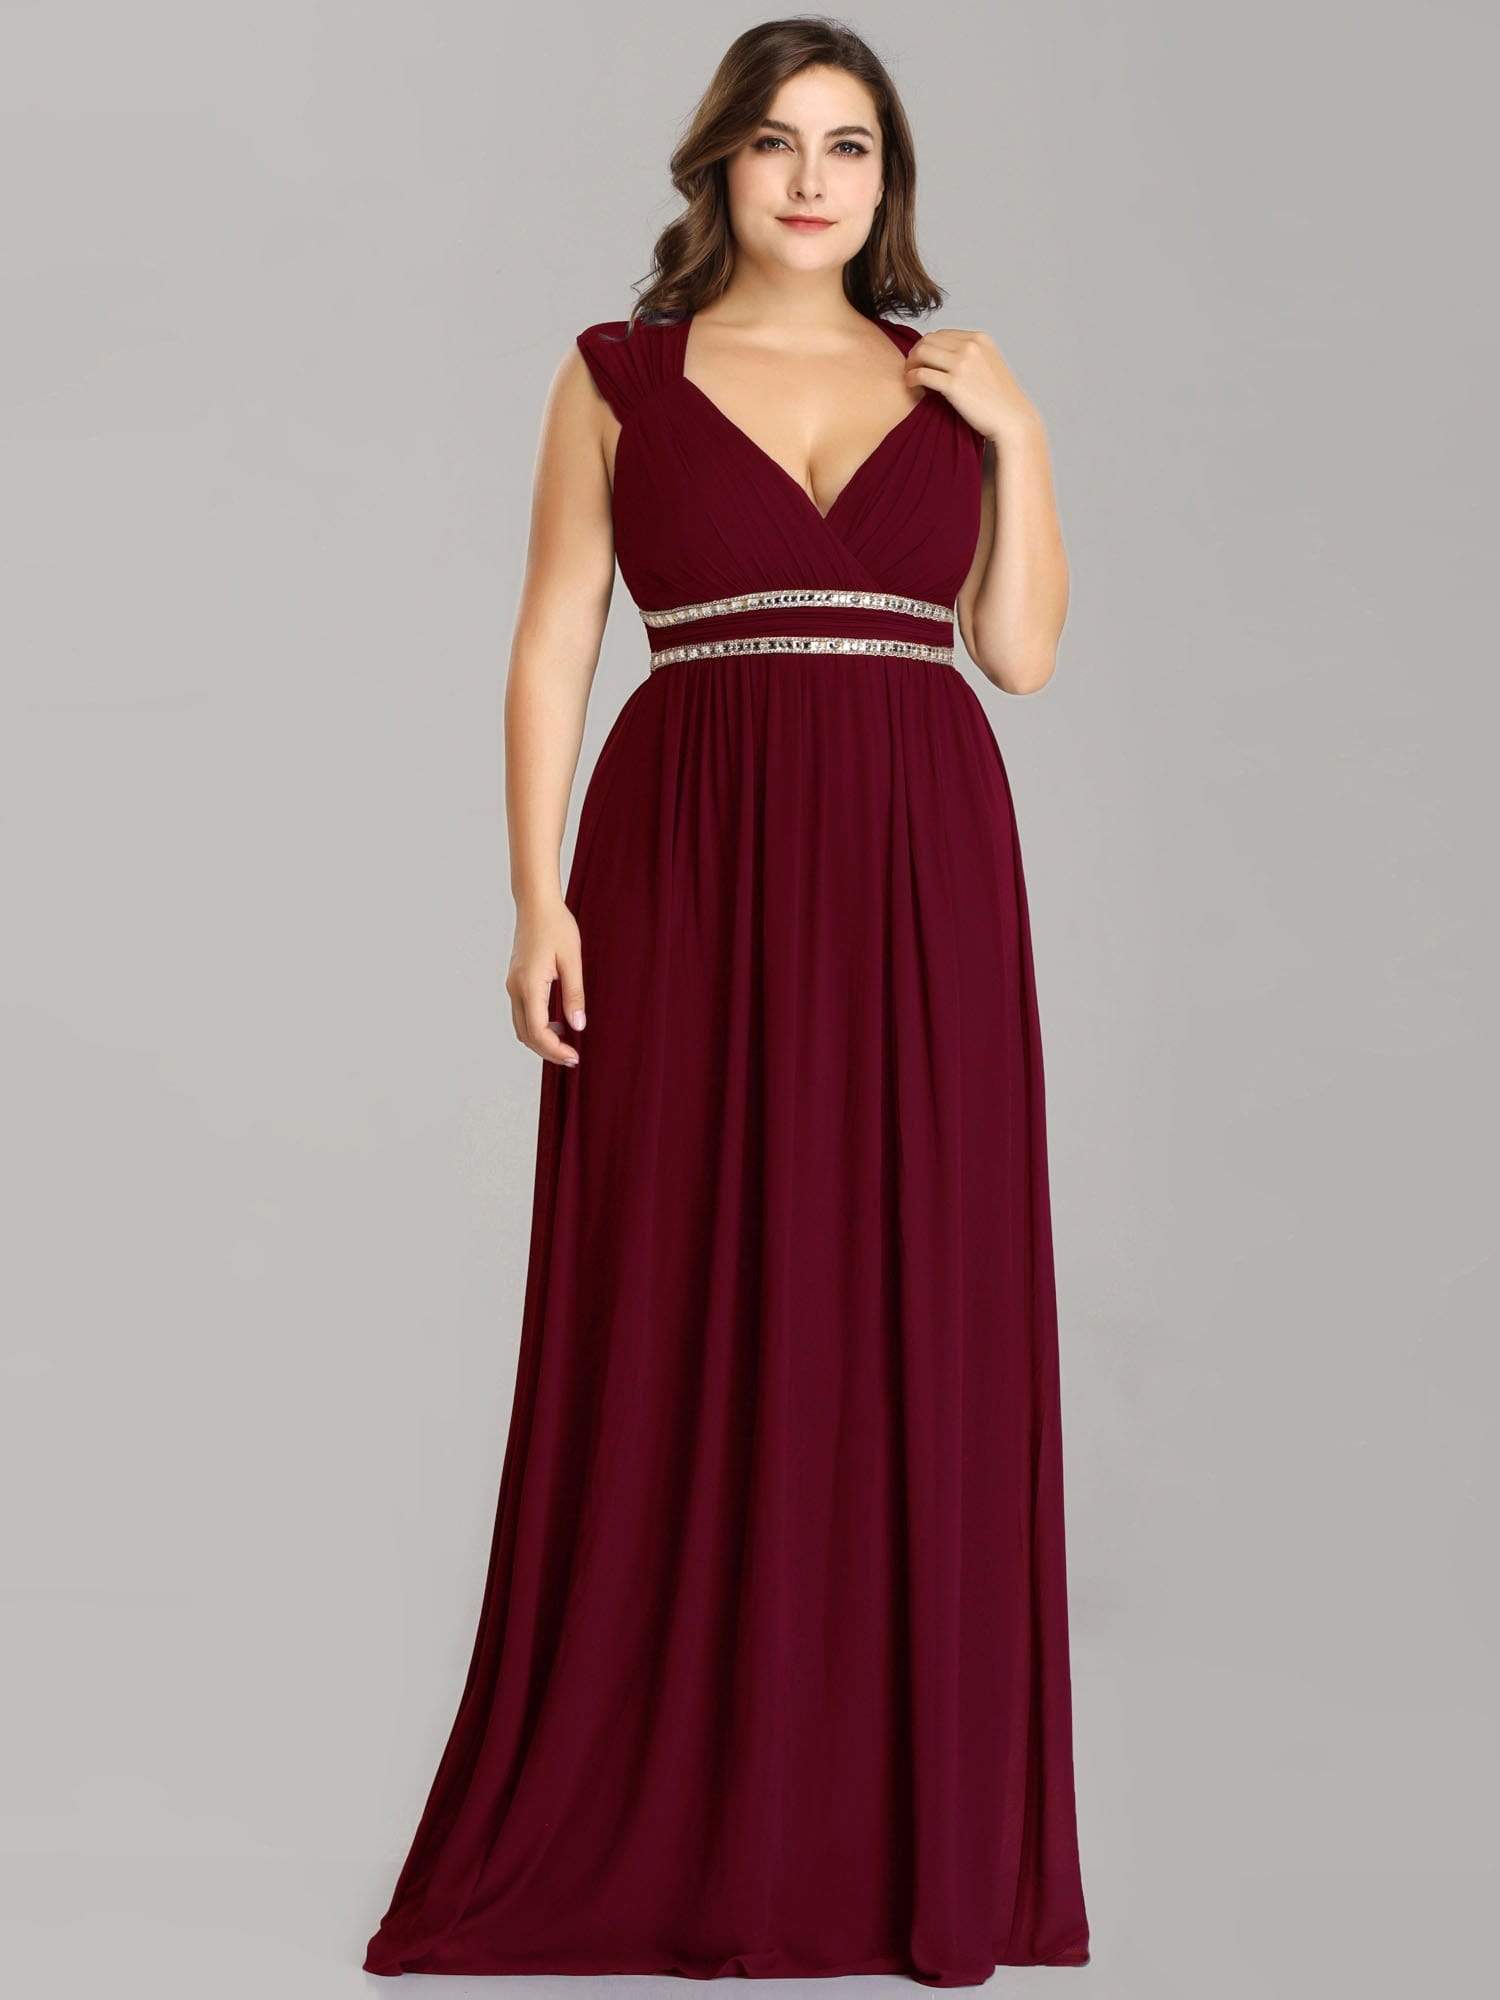 Formal Evening Gowns Plus Size Burgundy Bridesmaid Dresses